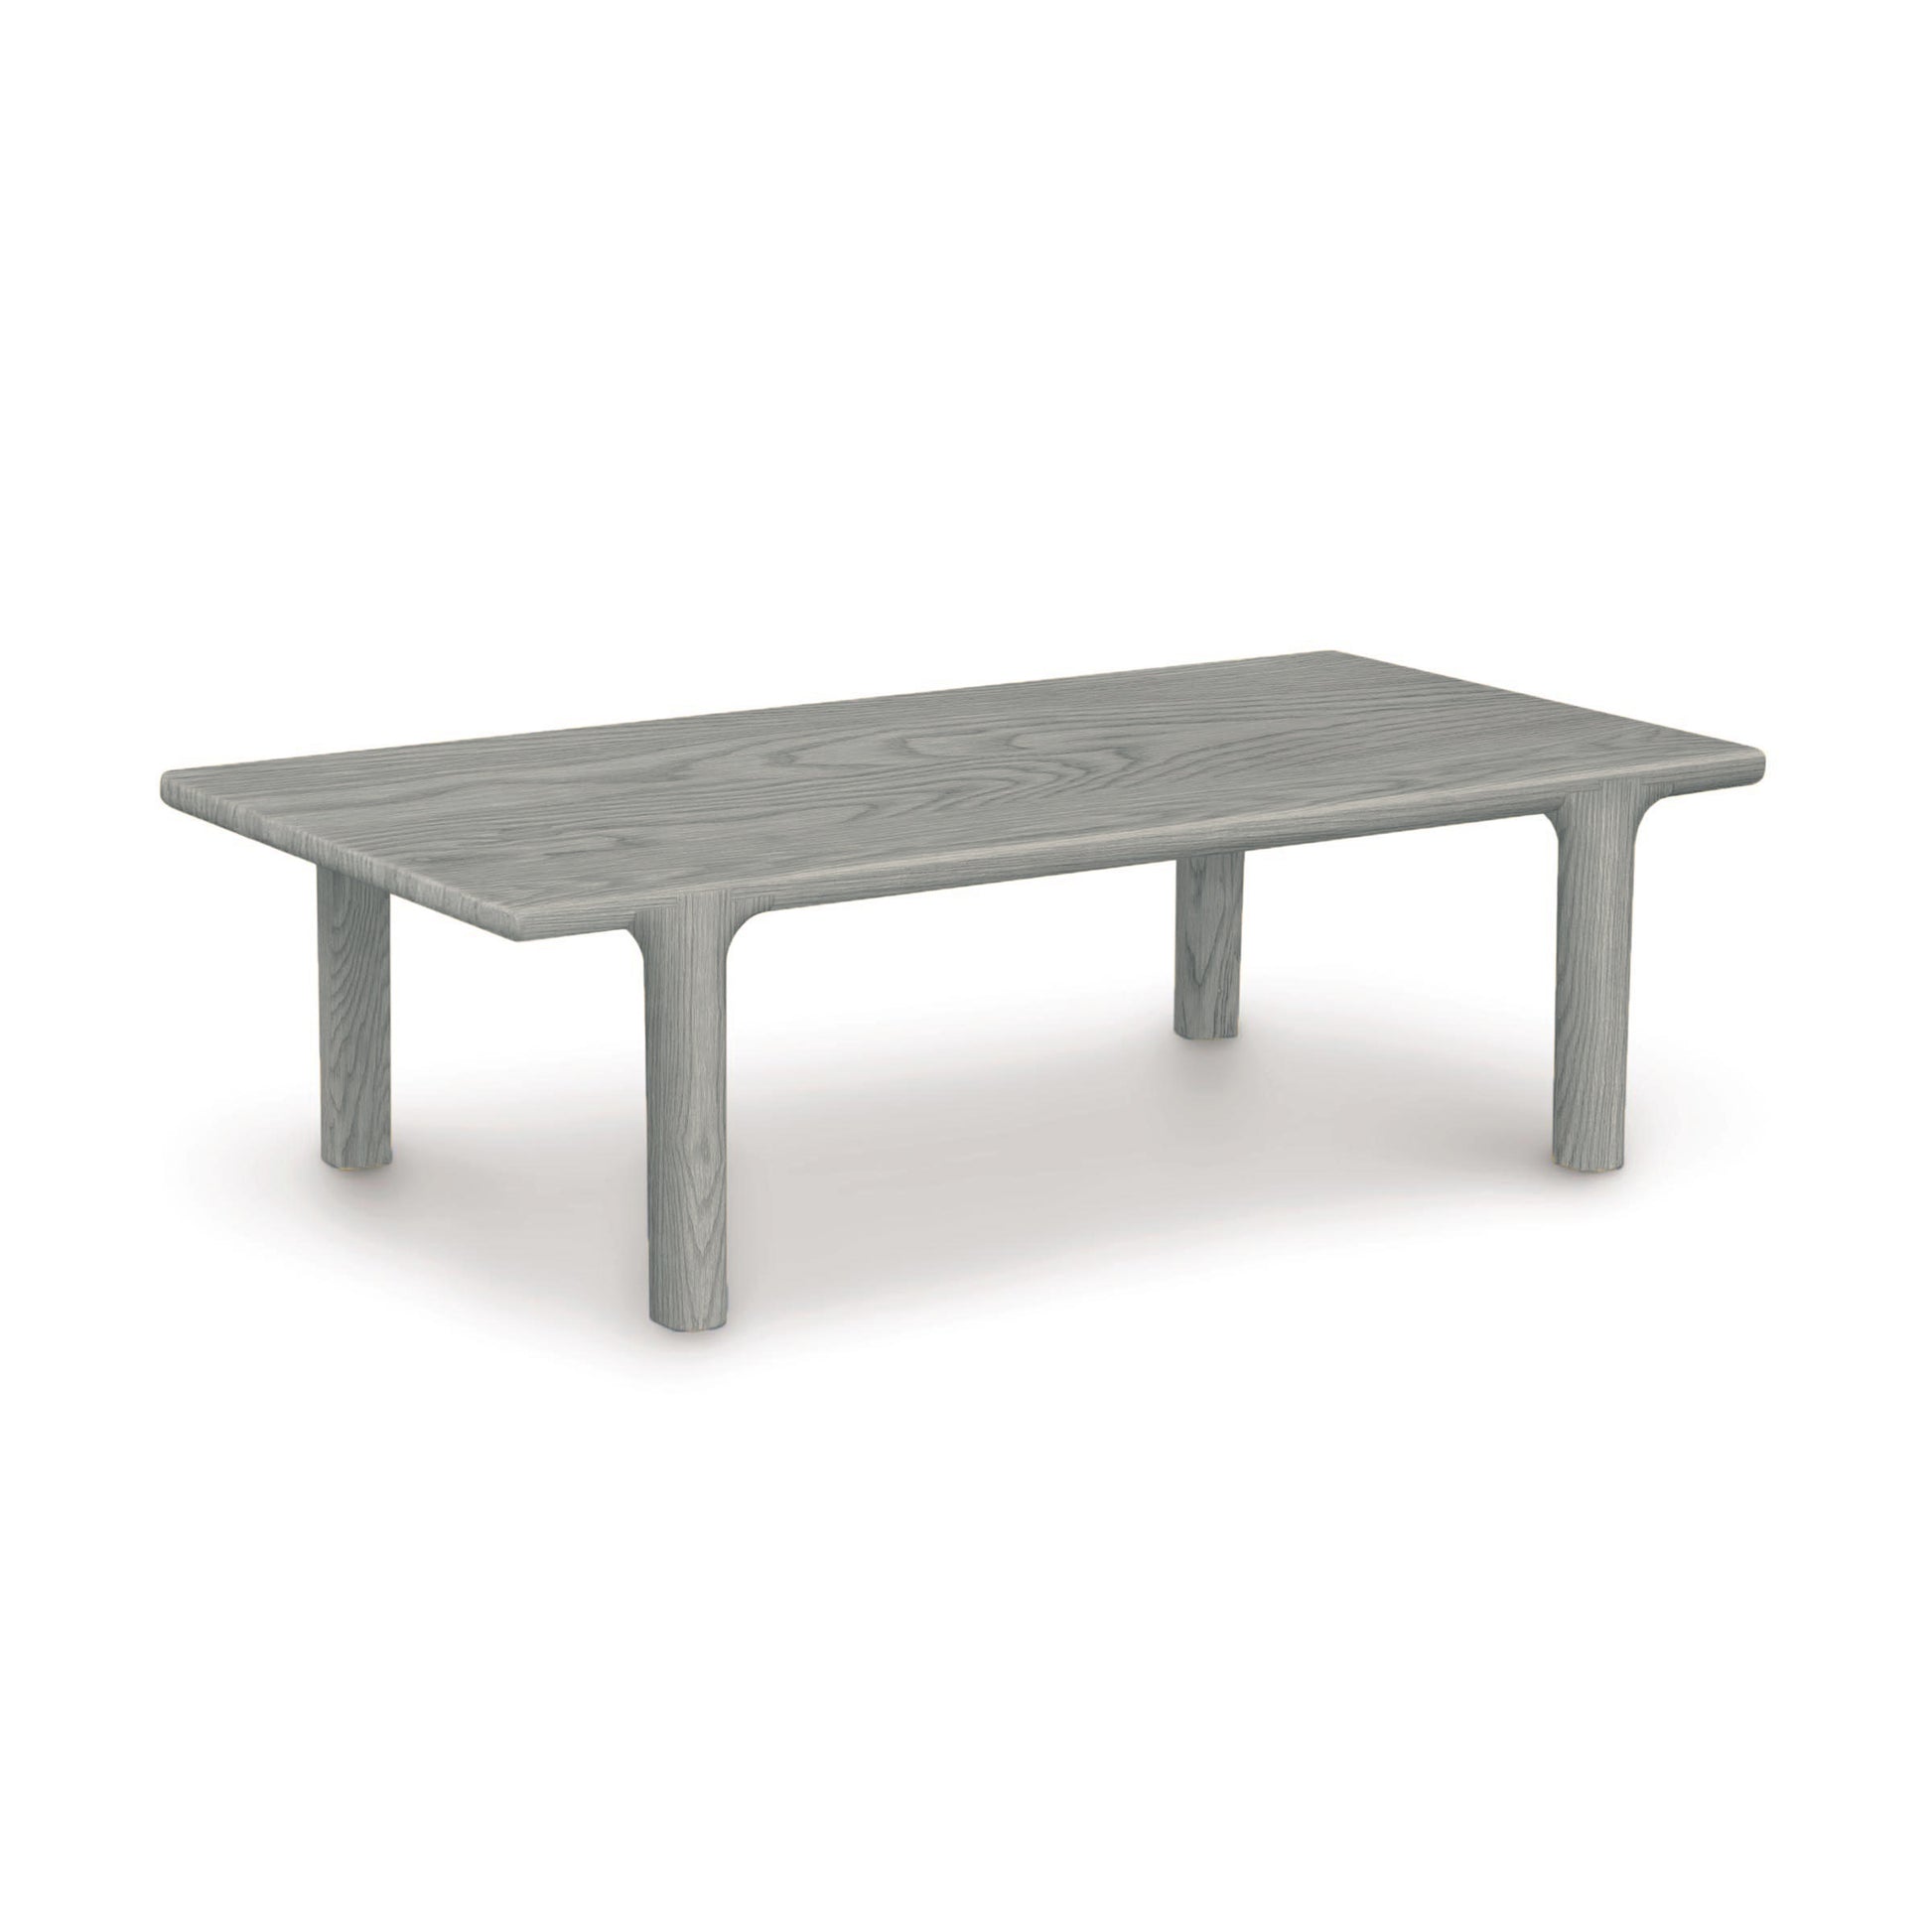 A rectangular wooden coffee table from the Copeland Furniture Sierra Rectangular Coffee Table collection, isolated on a white background.